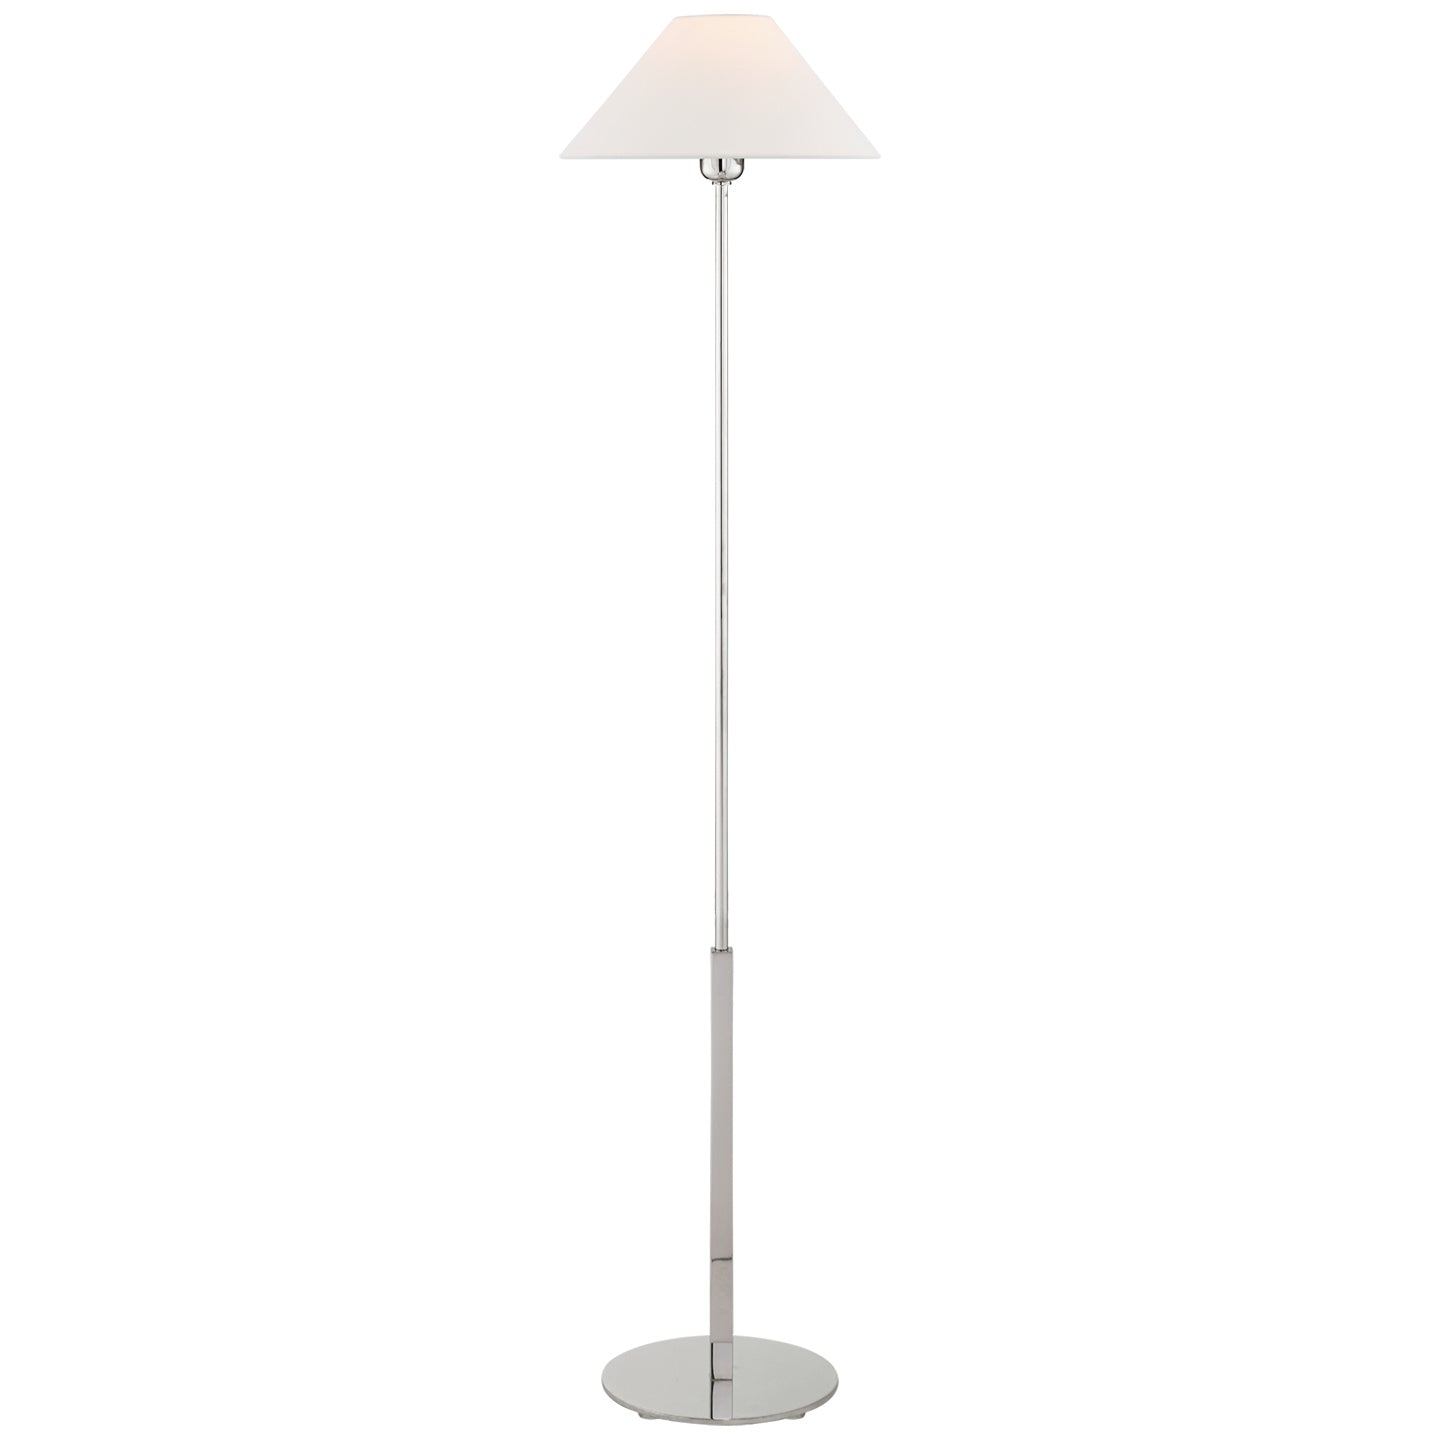 Load image into Gallery viewer, Visual Comfort Signature - SP 1022PN-L - One Light Floor Lamp - Hackney - Polished Nickel
